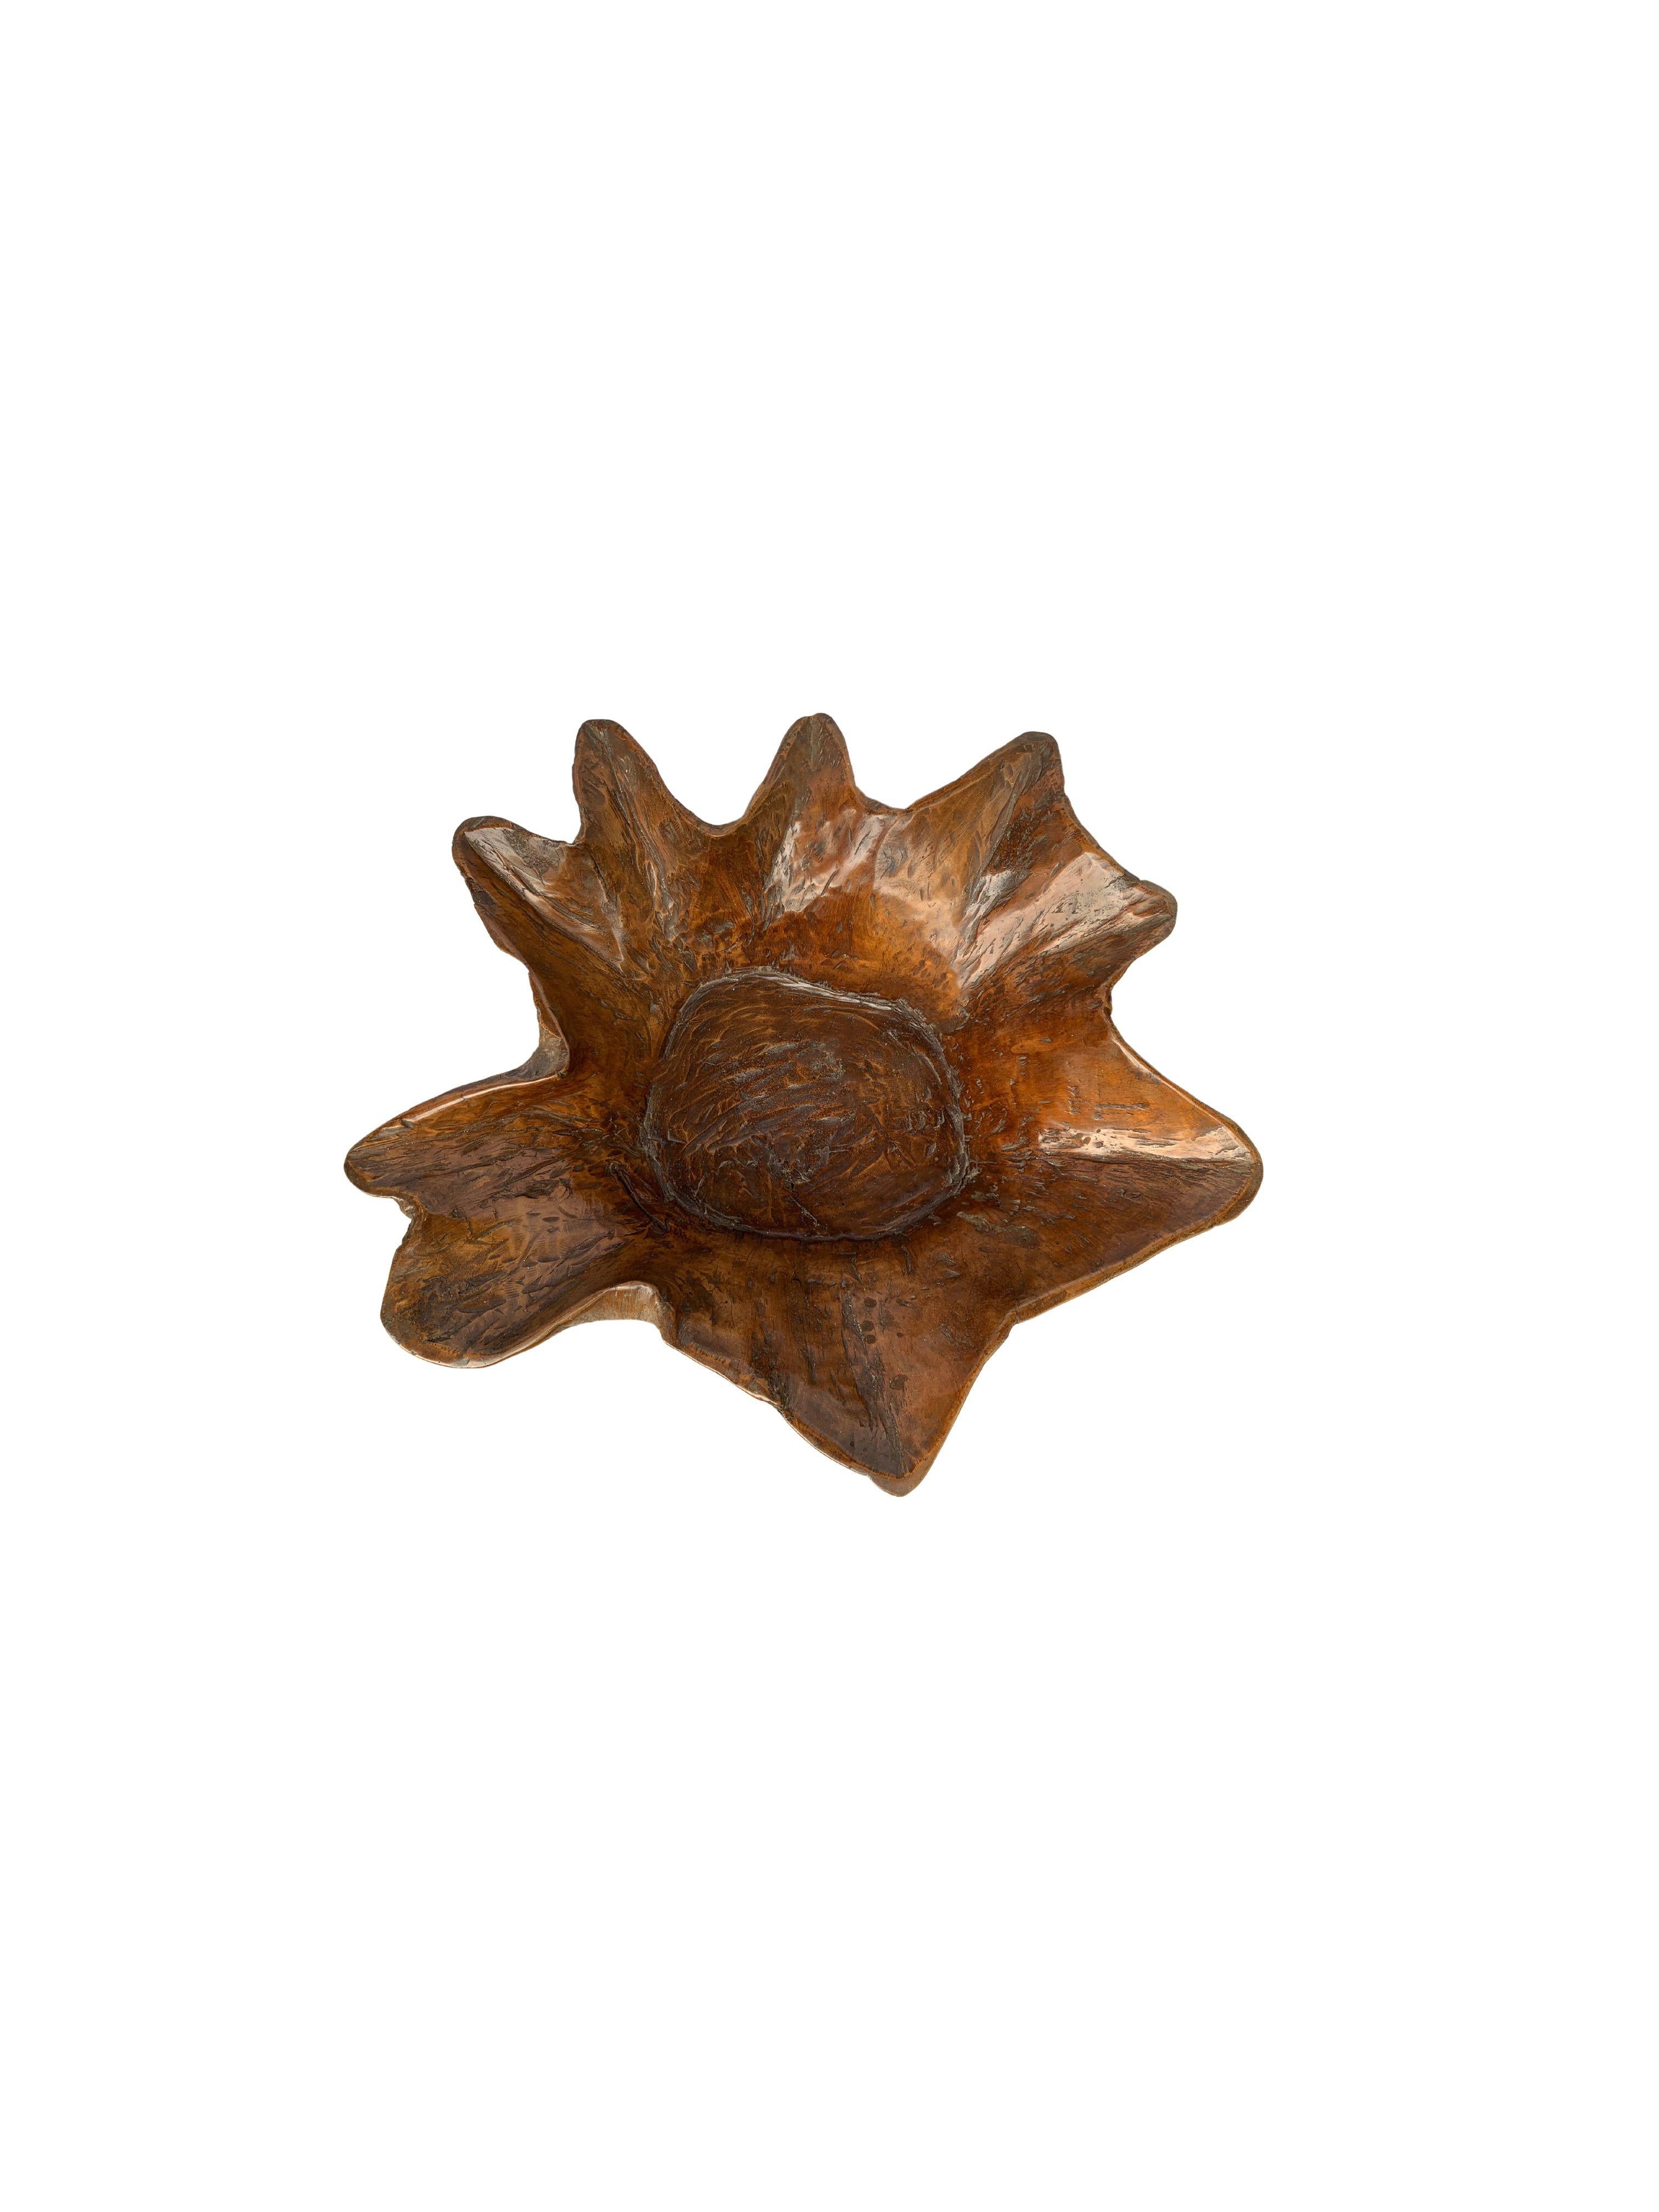 Other Sculptural Teak Wood Bowl from Java, Indonesia, c. 1980